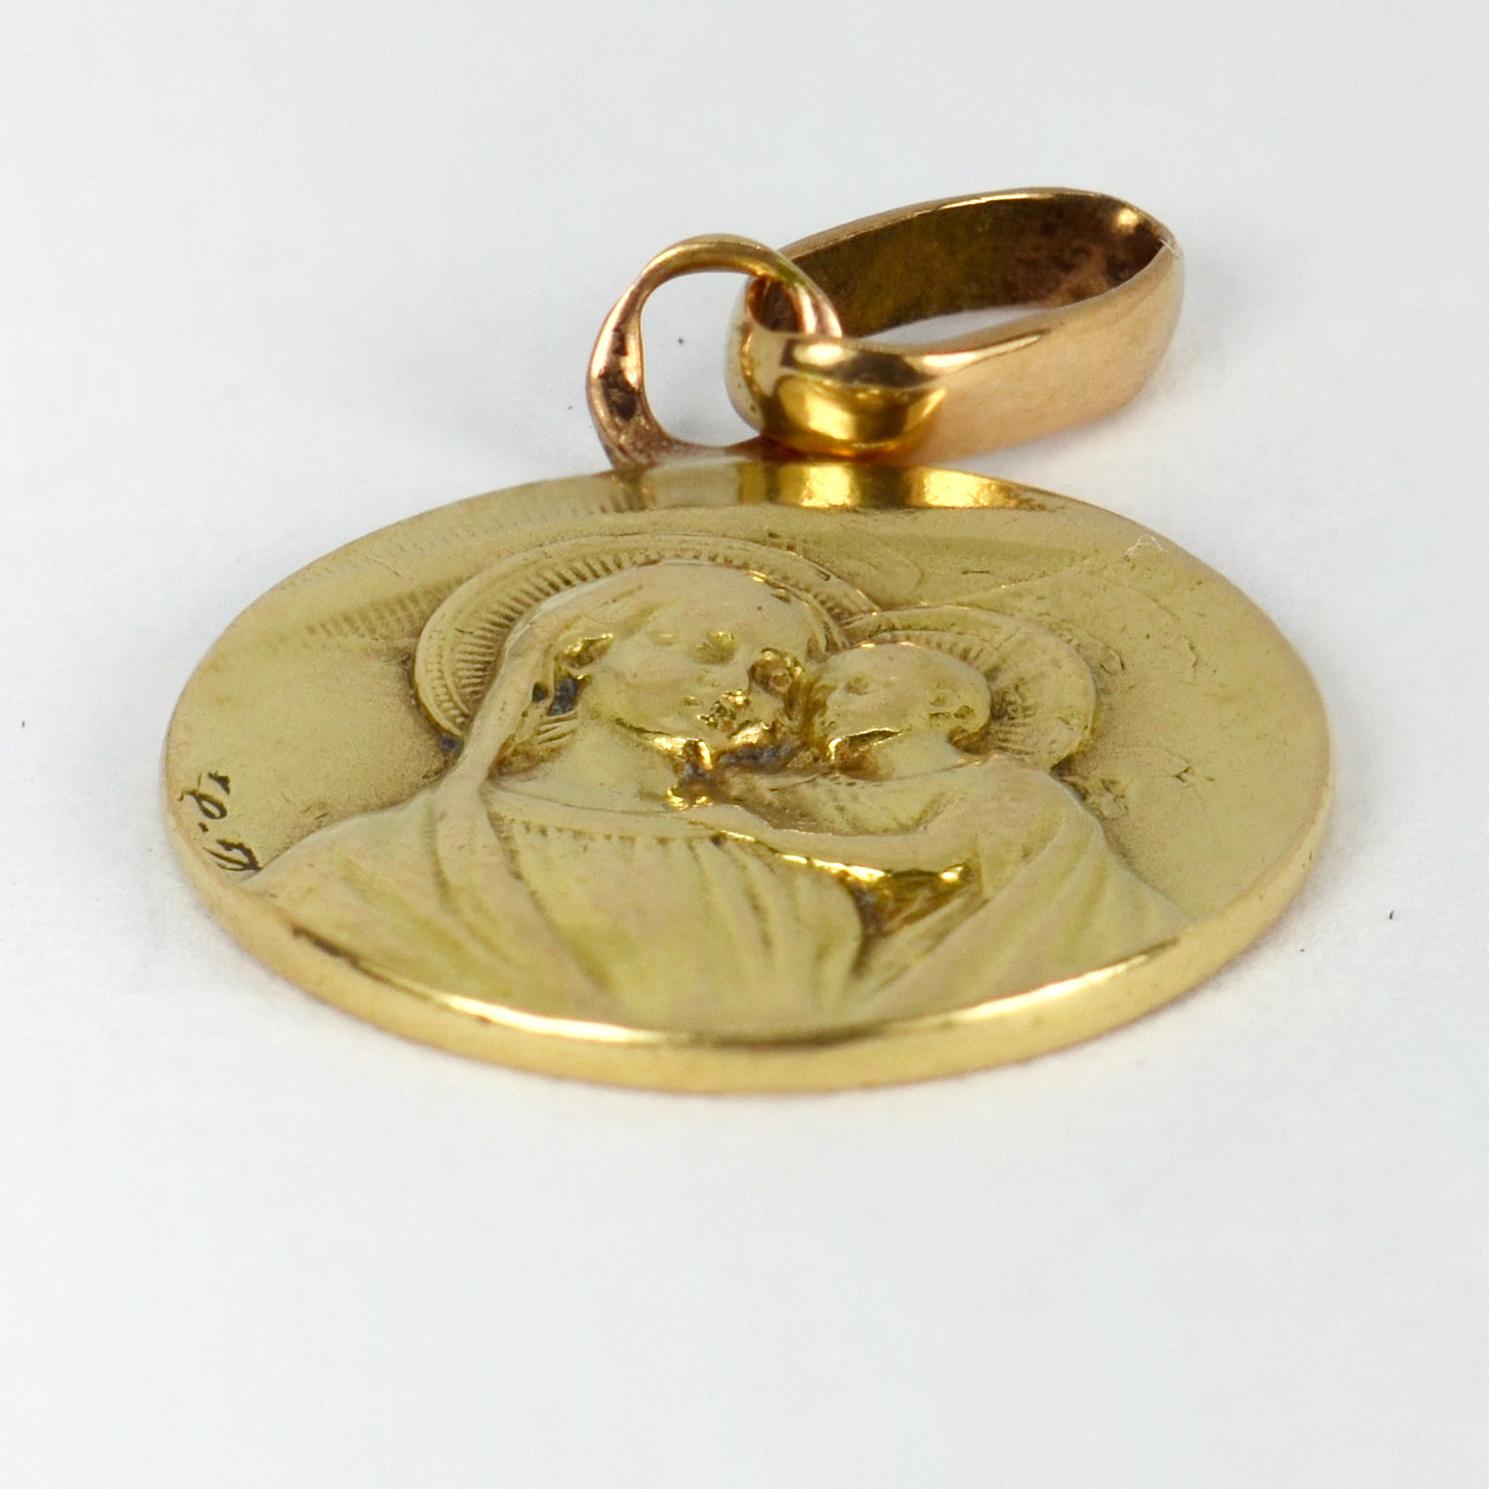 A French 18 karat (18K) yellow gold charm pendant designed as medal depicting the Madonna and child on one side, the other depicting Jesus with a sacred heart, framed by the words ‘Cor Jesu Eurcharisticum Miserere Nobis’ (Eucharistic heart of Jesus,